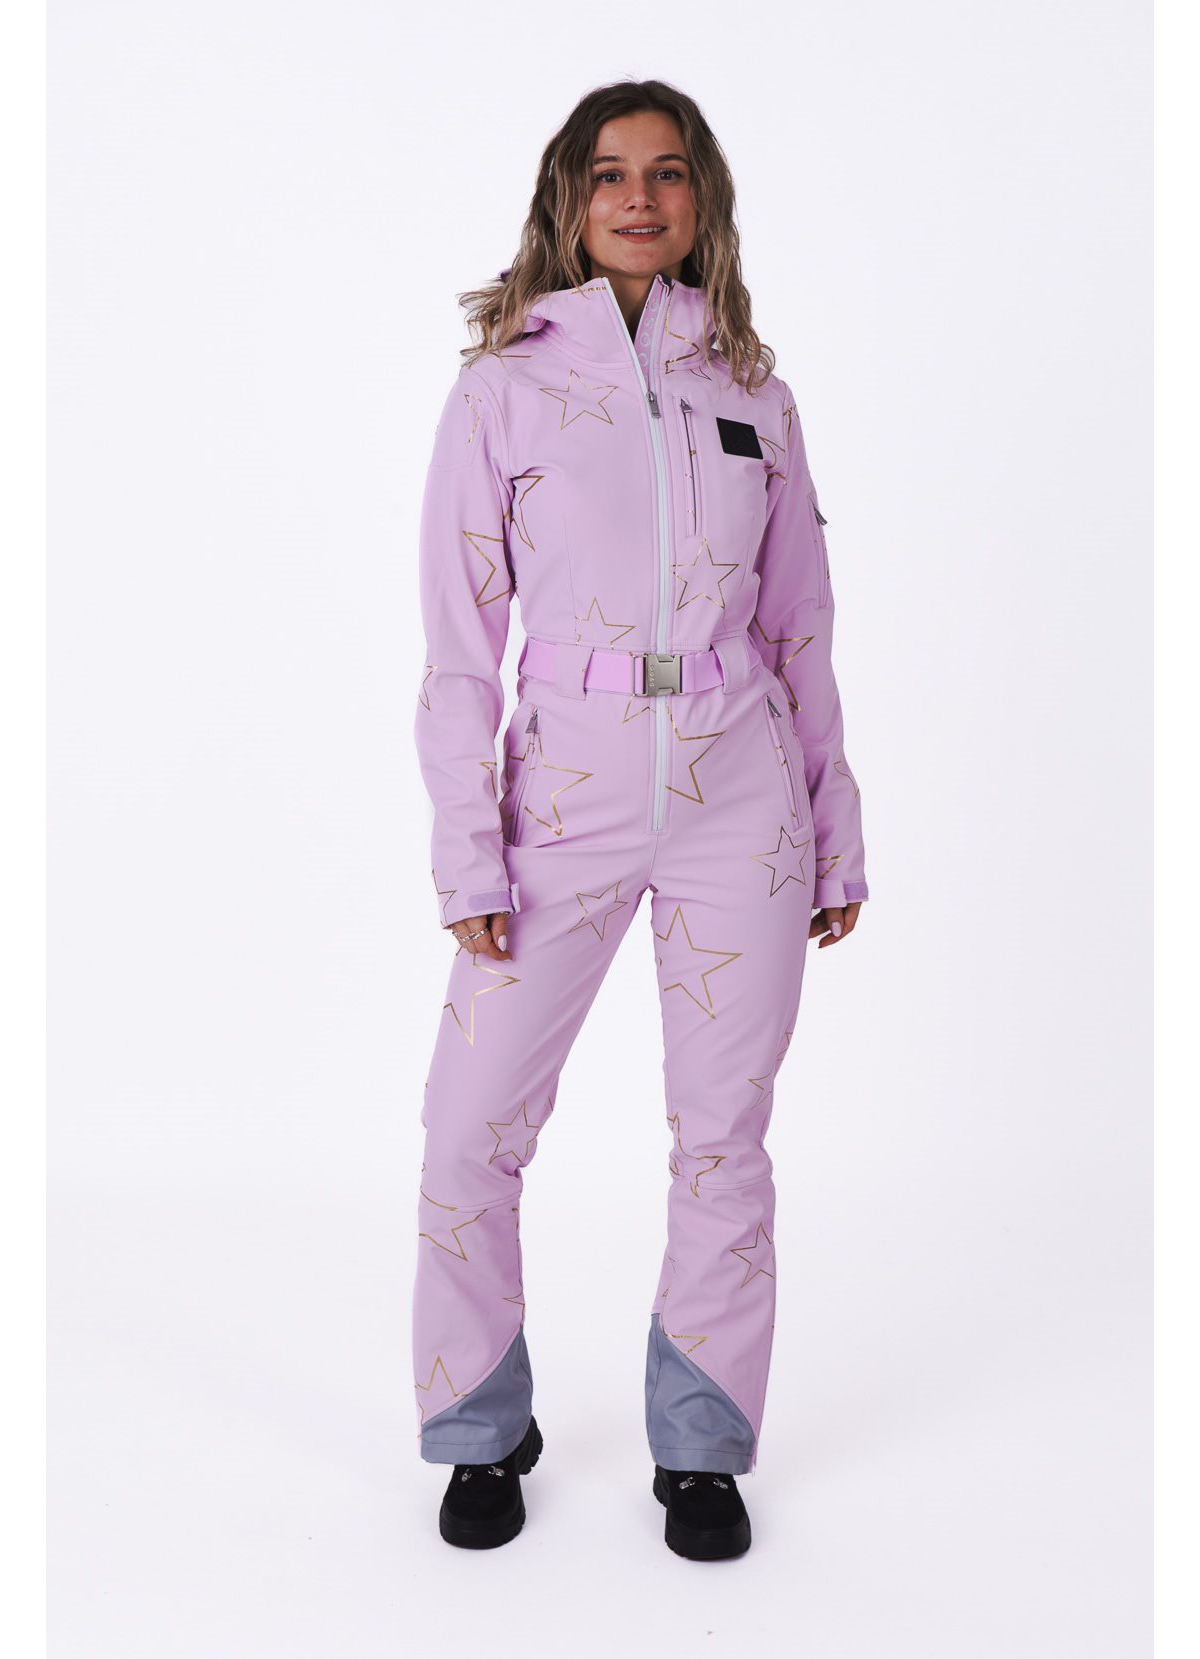 Women's Pink with Stars Chic Ski Suit - Pink